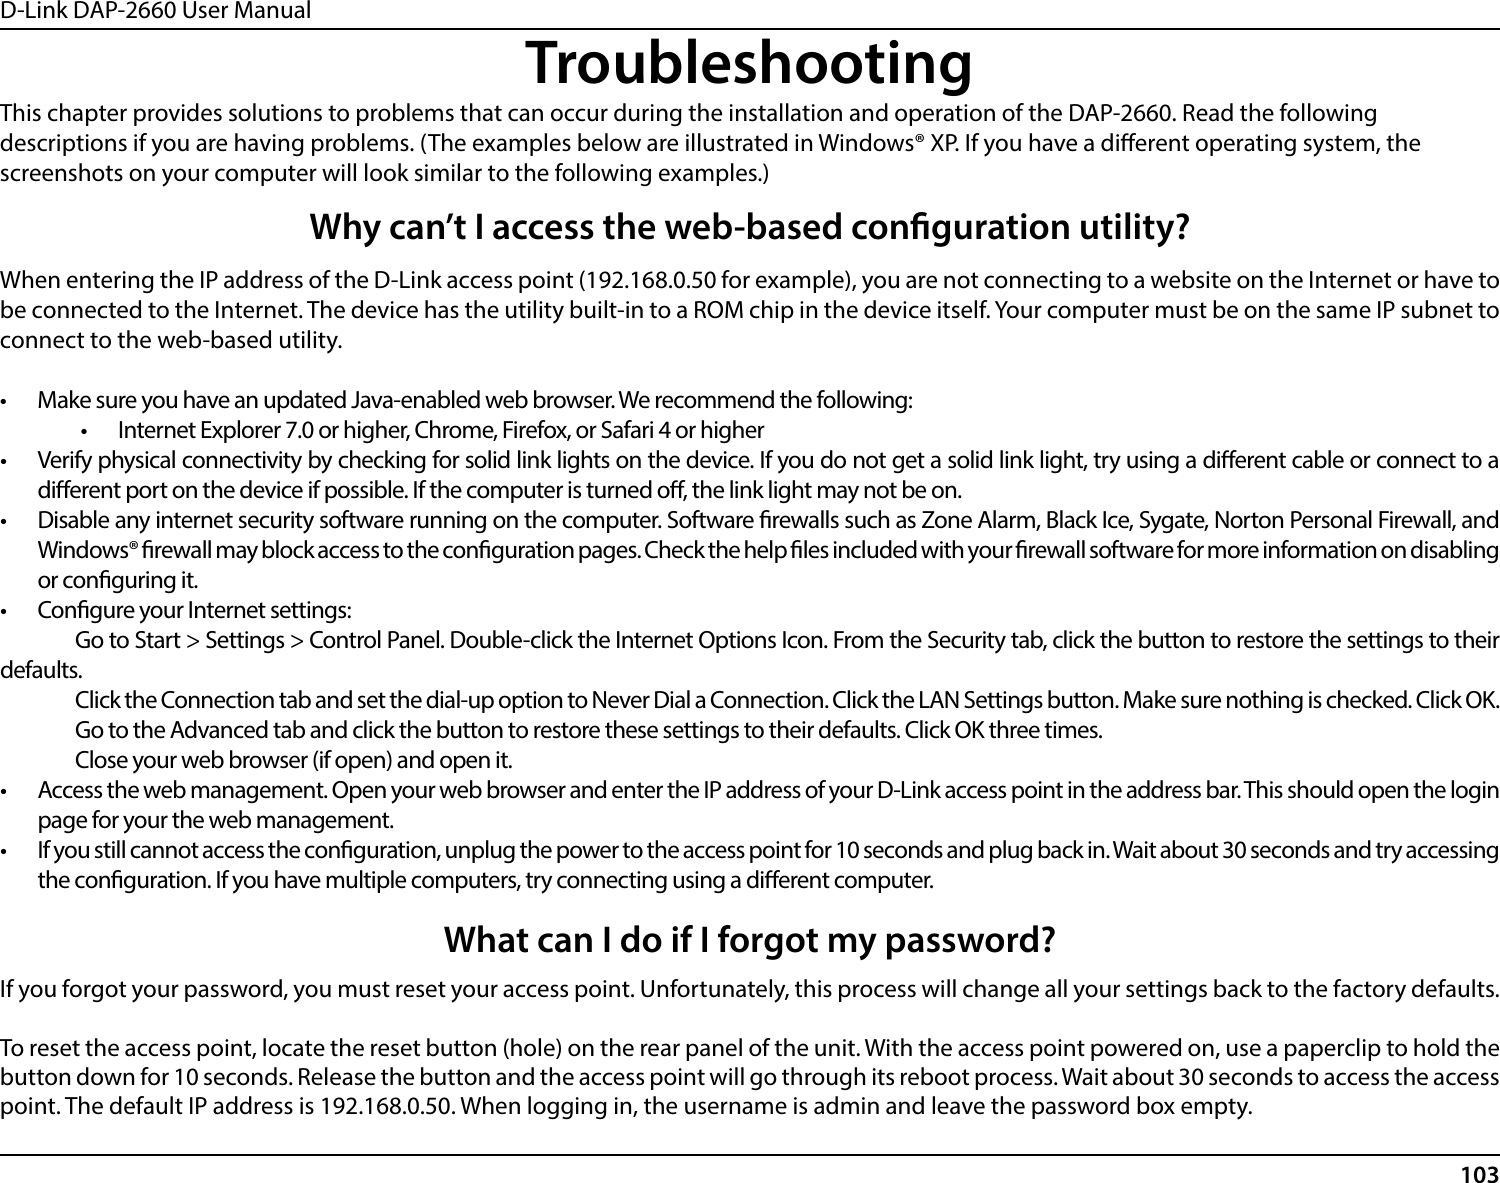 D-Link DAP-2660 User Manual103TroubleshootingWhen entering the IP address of the D-Link access point (192.168.0.50 for example), you are not connecting to a website on the Internet or have to be connected to the Internet. The device has the utility built-in to a ROM chip in the device itself. Your computer must be on the same IP subnet to connect to the web-based utility.•  Make sure you have an updated Java-enabled web browser. We recommend the following:•  Internet Explorer 7.0 or higher, Chrome, Firefox, or Safari 4 or higher•  Verify physical connectivity by checking for solid link lights on the device. If you do not get a solid link light, try using a dierent cable or connect to a dierent port on the device if possible. If the computer is turned o, the link light may not be on.•  Disable any internet security software running on the computer. Software rewalls such as Zone Alarm, Black Ice, Sygate, Norton Personal Firewall, and Windows® rewall may block access to the conguration pages. Check the help les included with your rewall software for more information on disabling or conguring it.•  Congure your Internet settings:  Go to Start &gt; Settings &gt; Control Panel. Double-click the Internet Options Icon. From the Security tab, click the button to restore the settings to their defaults.  Click the Connection tab and set the dial-up option to Never Dial a Connection. Click the LAN Settings button. Make sure nothing is checked. Click OK.  Go to the Advanced tab and click the button to restore these settings to their defaults. Click OK three times.  Close your web browser (if open) and open it.•  Access the web management. Open your web browser and enter the IP address of your D-Link access point in the address bar. This should open the login page for your the web management.•  If you still cannot access the conguration, unplug the power to the access point for 10 seconds and plug back in. Wait about 30 seconds and try accessing the conguration. If you have multiple computers, try connecting using a dierent computer.Why can’t I access the web-based conguration utility?This chapter provides solutions to problems that can occur during the installation and operation of the DAP-2660. Read the following descriptions if you are having problems. (The examples below are illustrated in Windows® XP. If you have a dierent operating system, the screenshots on your computer will look similar to the following examples.)If you forgot your password, you must reset your access point. Unfortunately, this process will change all your settings back to the factory defaults.To reset the access point, locate the reset button (hole) on the rear panel of the unit. With the access point powered on, use a paperclip to hold the button down for 10 seconds. Release the button and the access point will go through its reboot process. Wait about 30 seconds to access the access point. The default IP address is 192.168.0.50. When logging in, the username is admin and leave the password box empty.What can I do if I forgot my password?